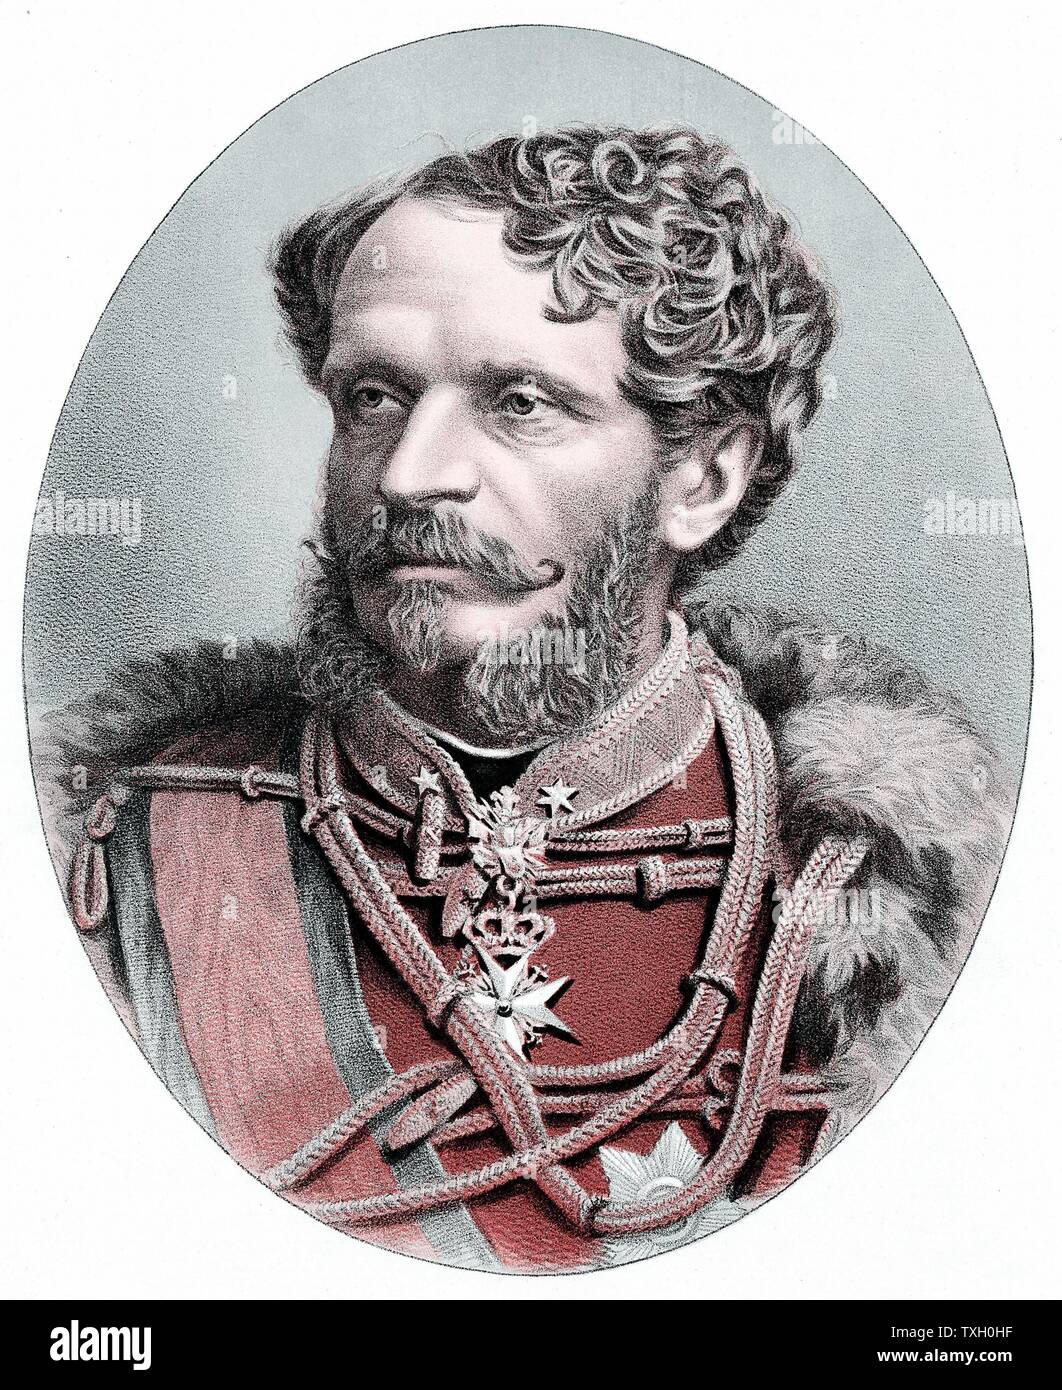 Count Julius Andrassy (1823-1890) Hungarian statesman, supporter of Kossuth and struggle for independence (1848-9). In exile until 1858; Prime Minister of Hungary 1867. Tinted lithograph published  c.1880 Stock Photo